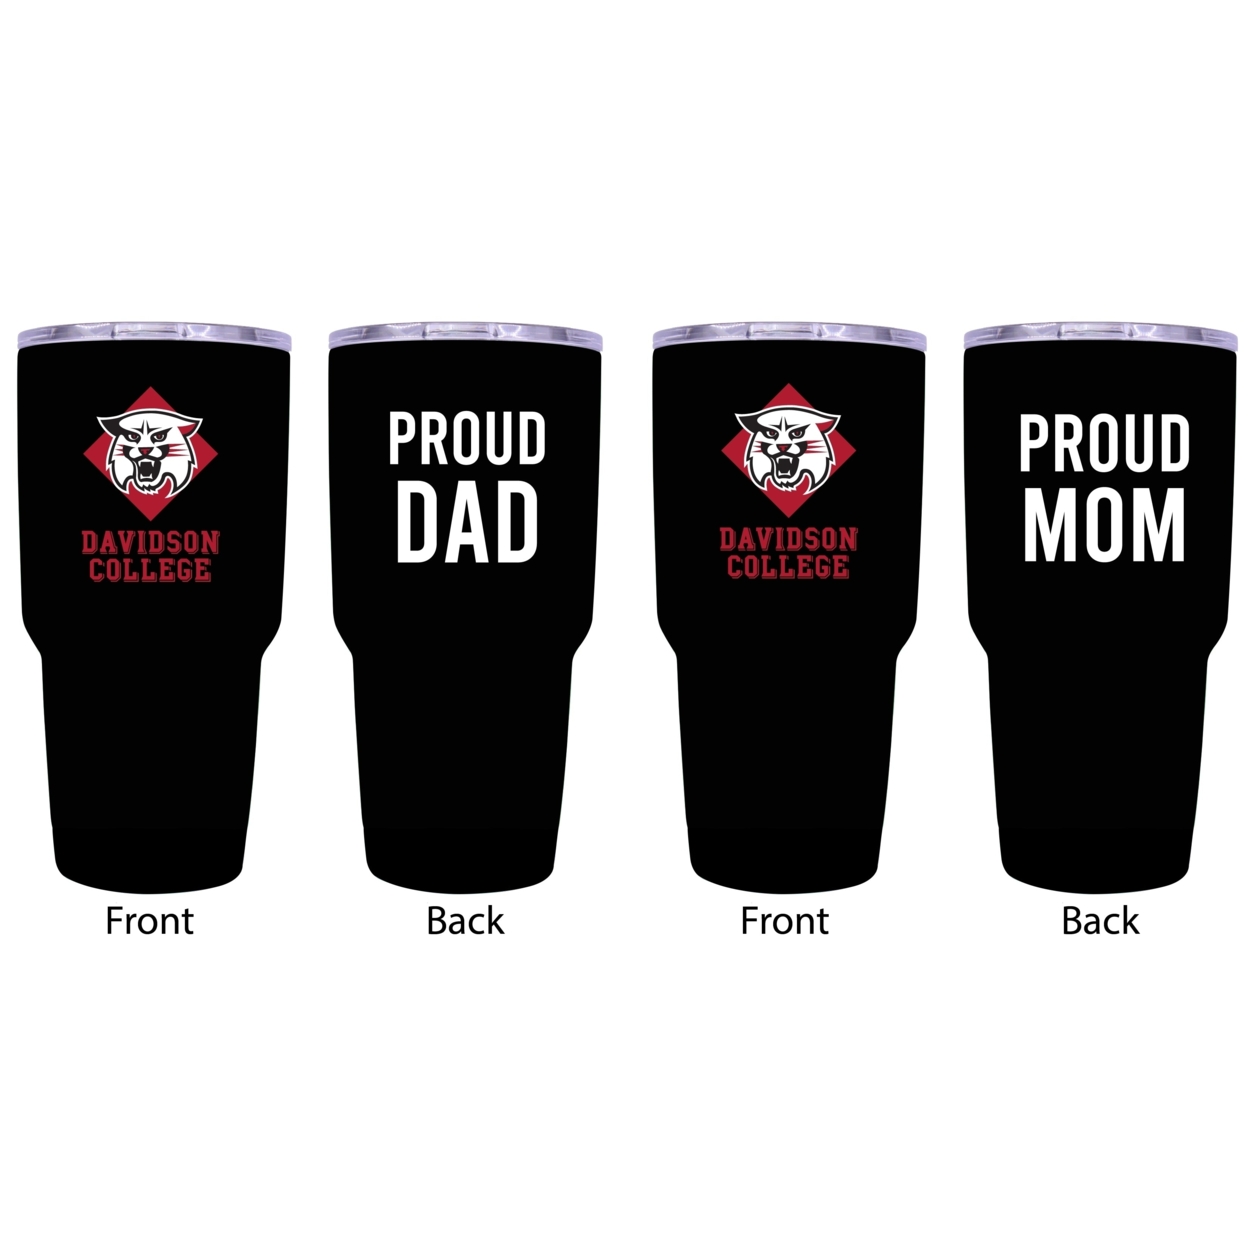 Davidson College Proud Mom And Dad 24 Oz Insulated Stainless Steel Tumblers 2 Pack Black.